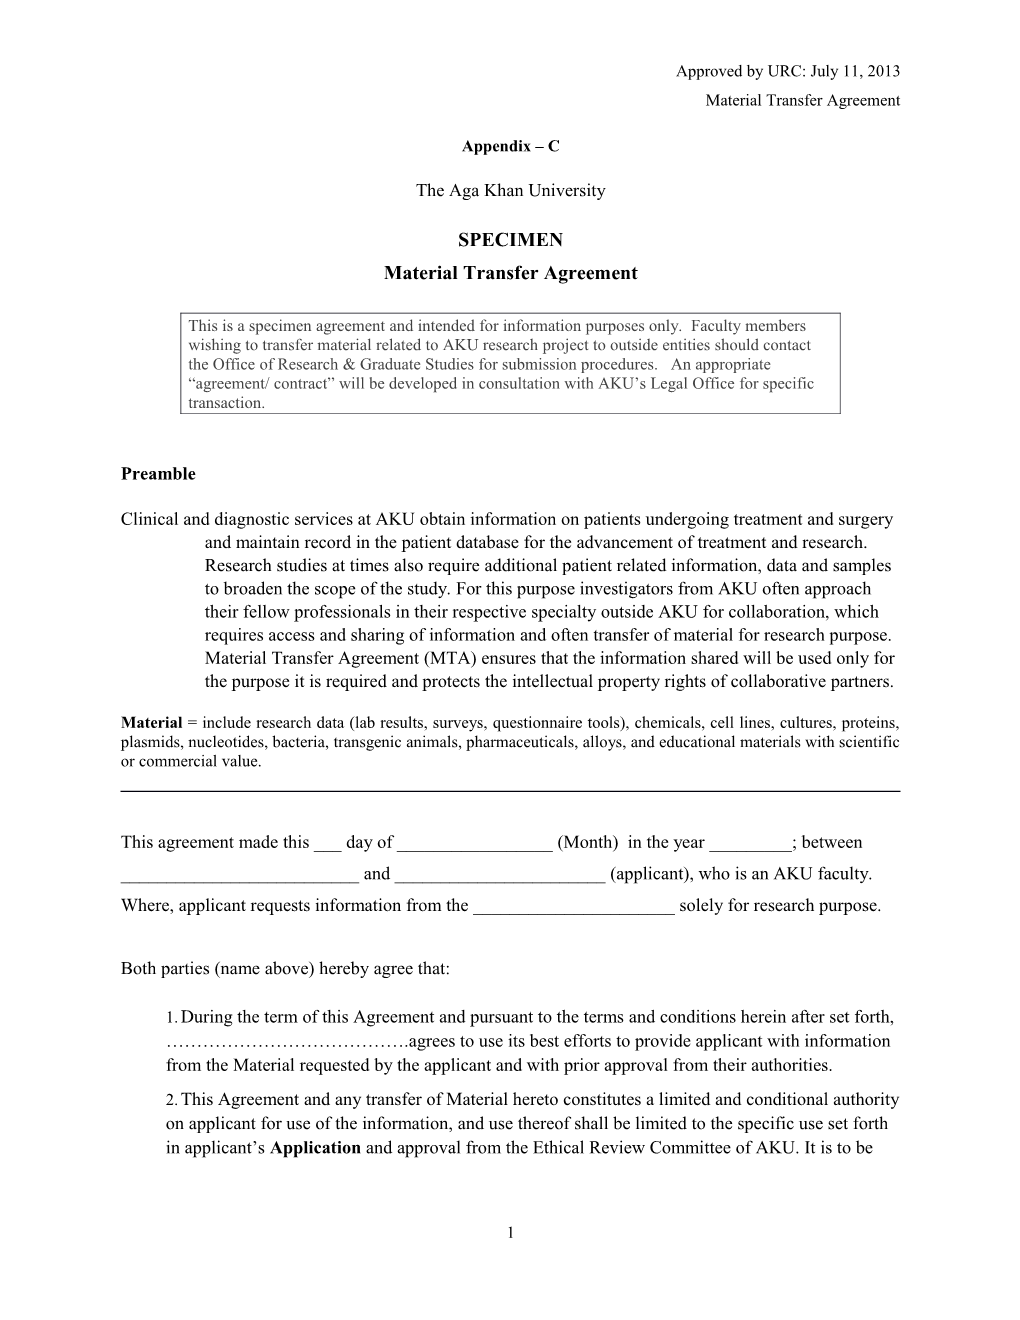 Material Transfer Agreement s1